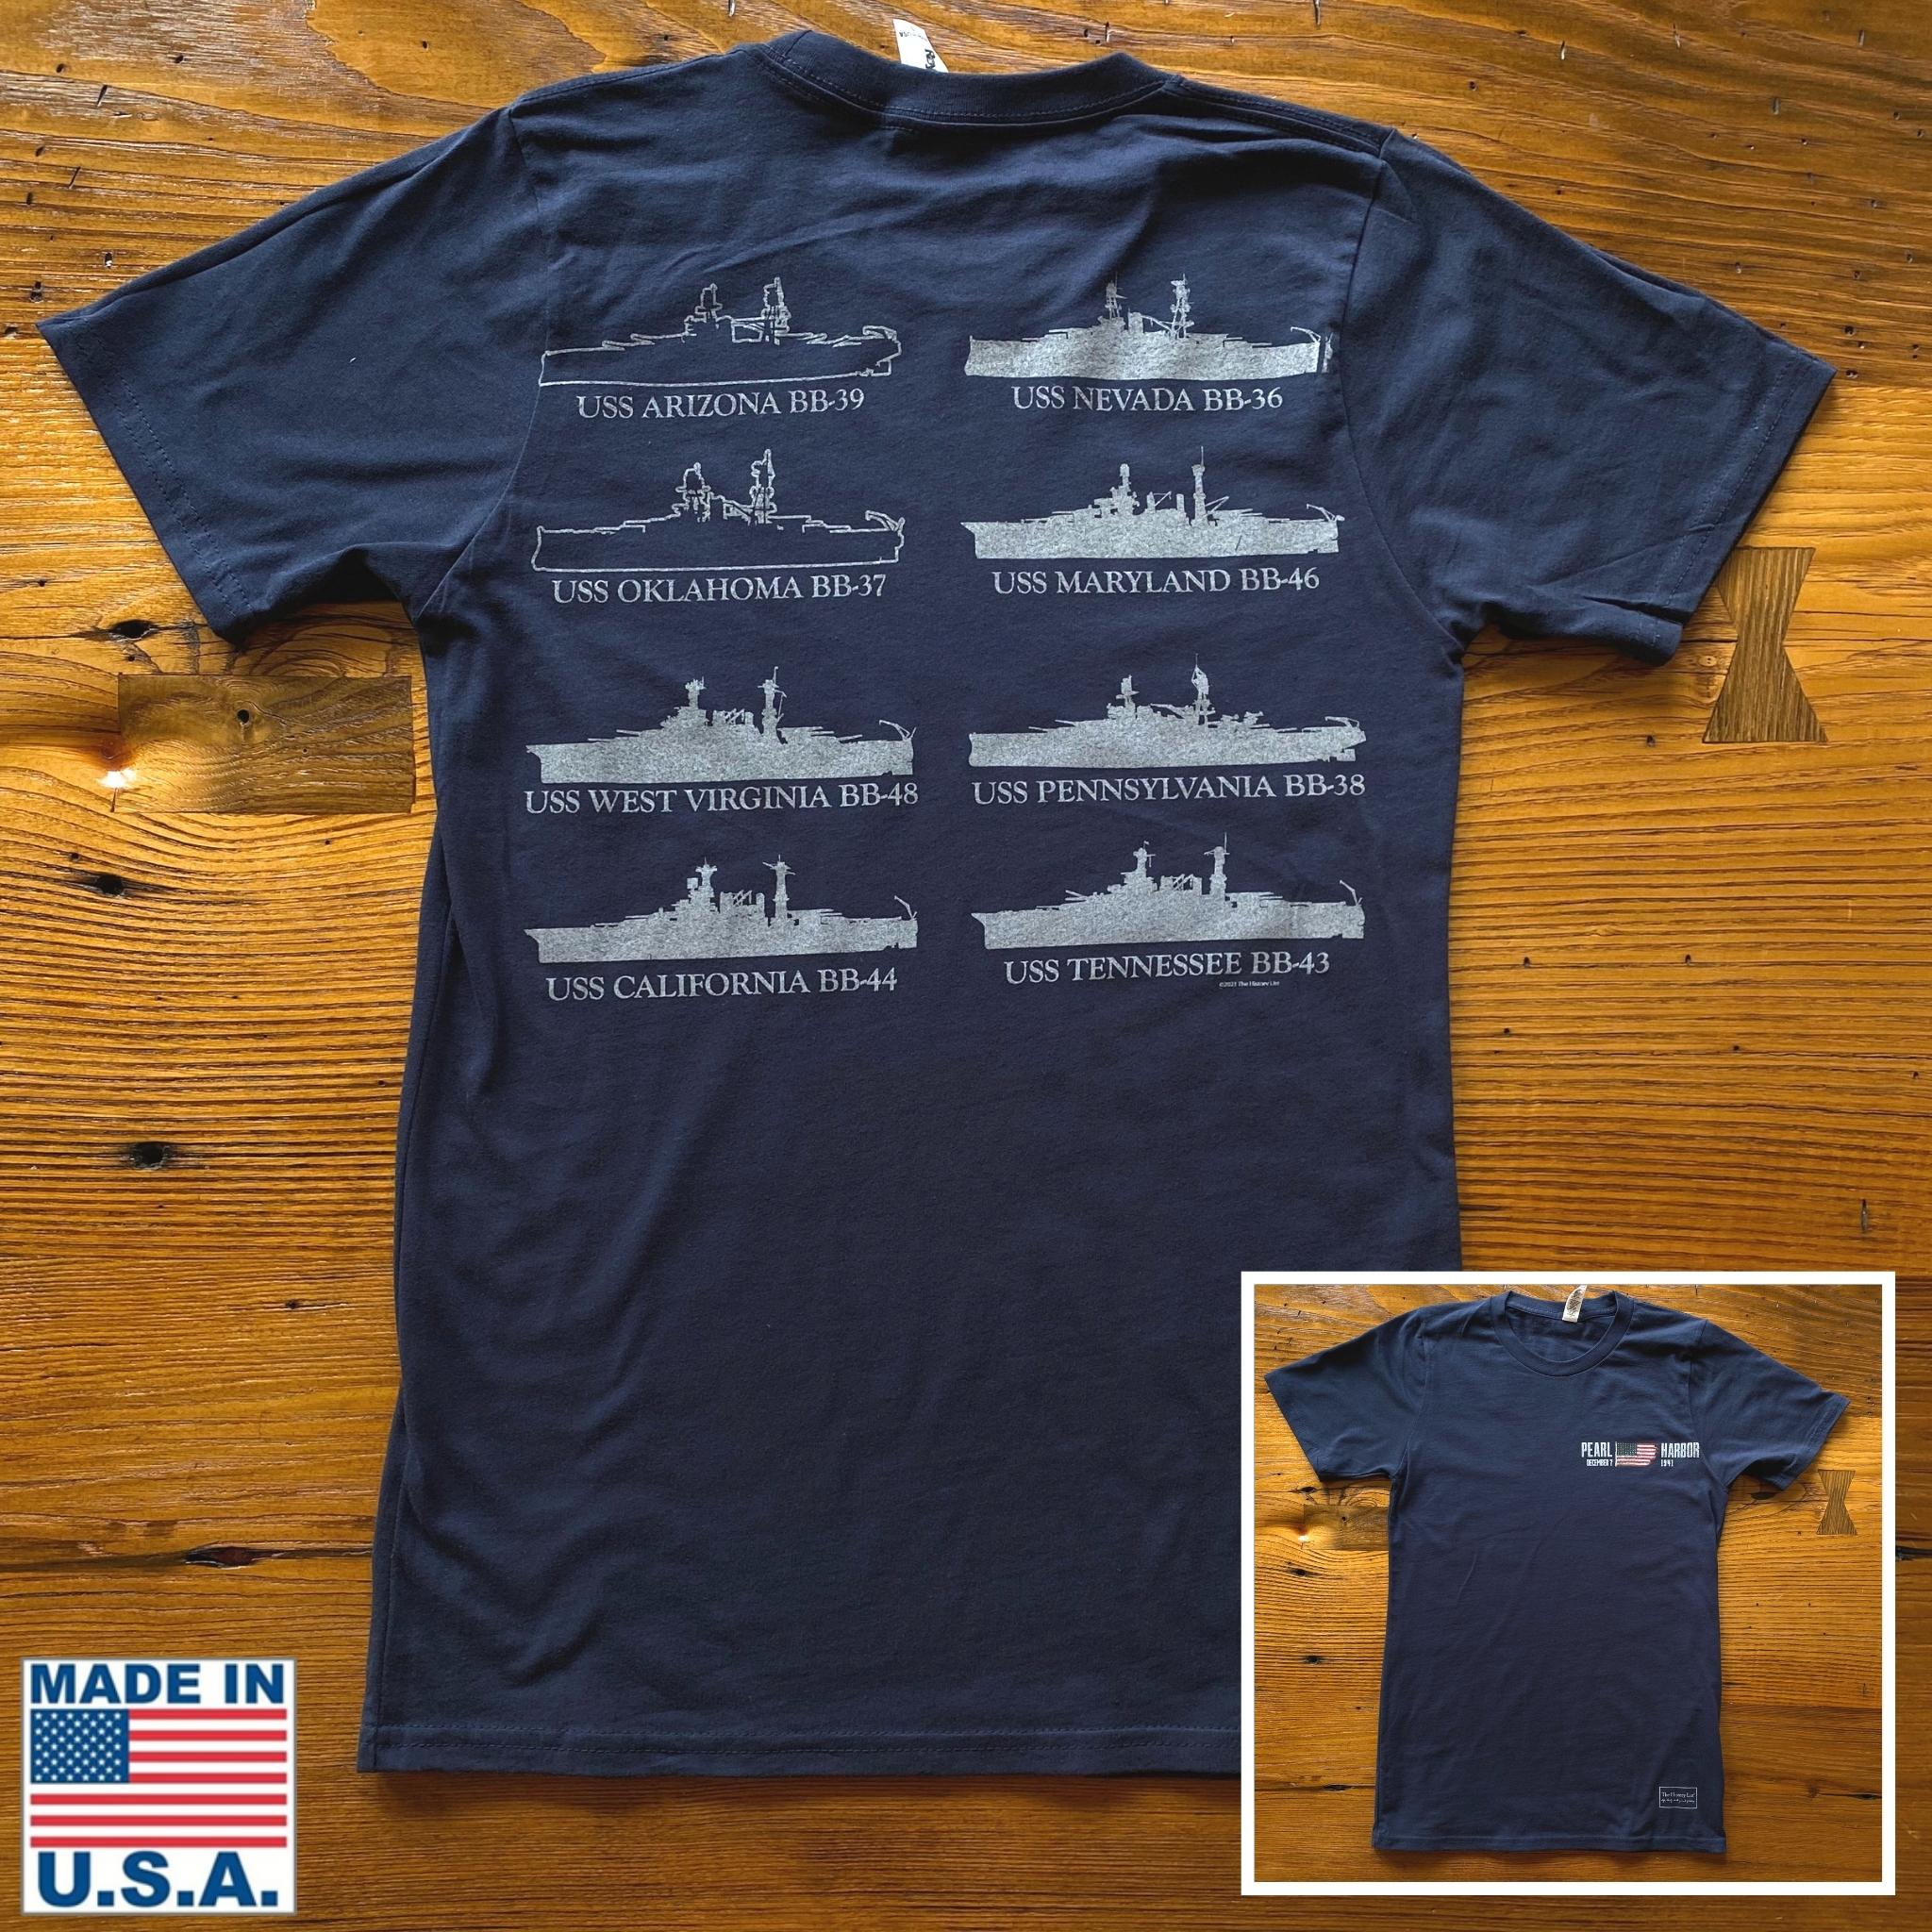 Bust Out Another Thousand Boat Definition Funny T-Shirt - Boating